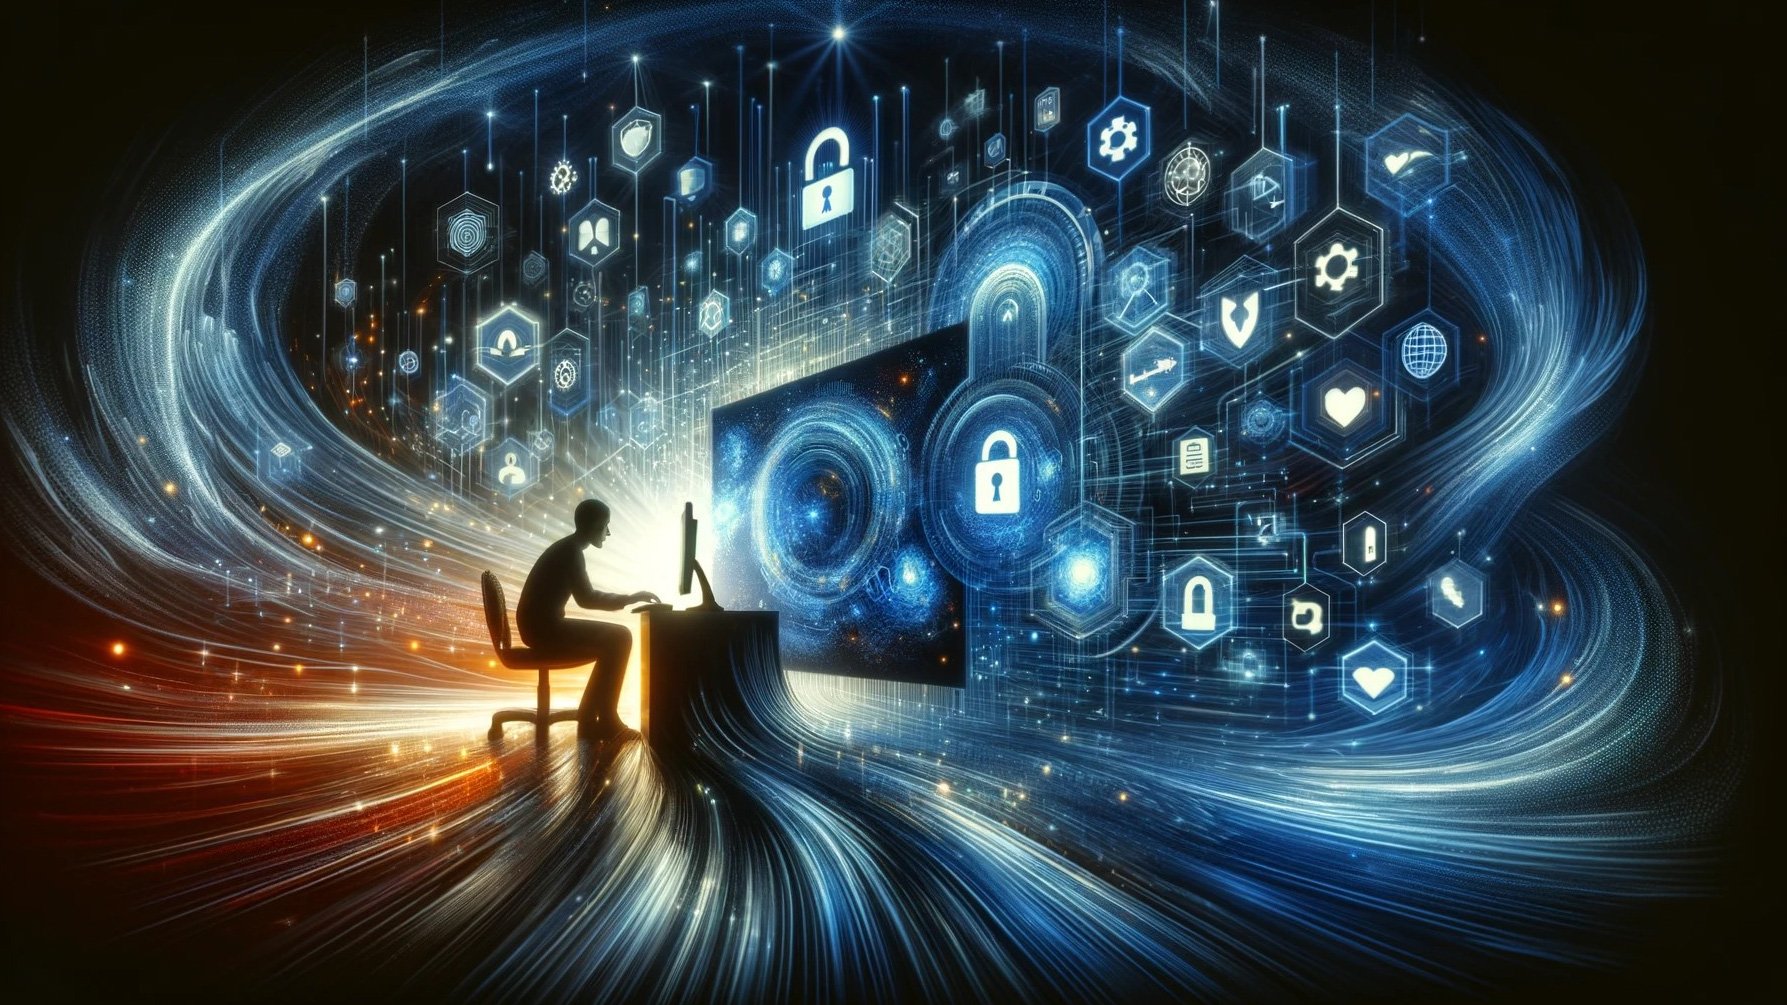 semi-abstract image representing a person researching and choosing the best cybersecurity solution